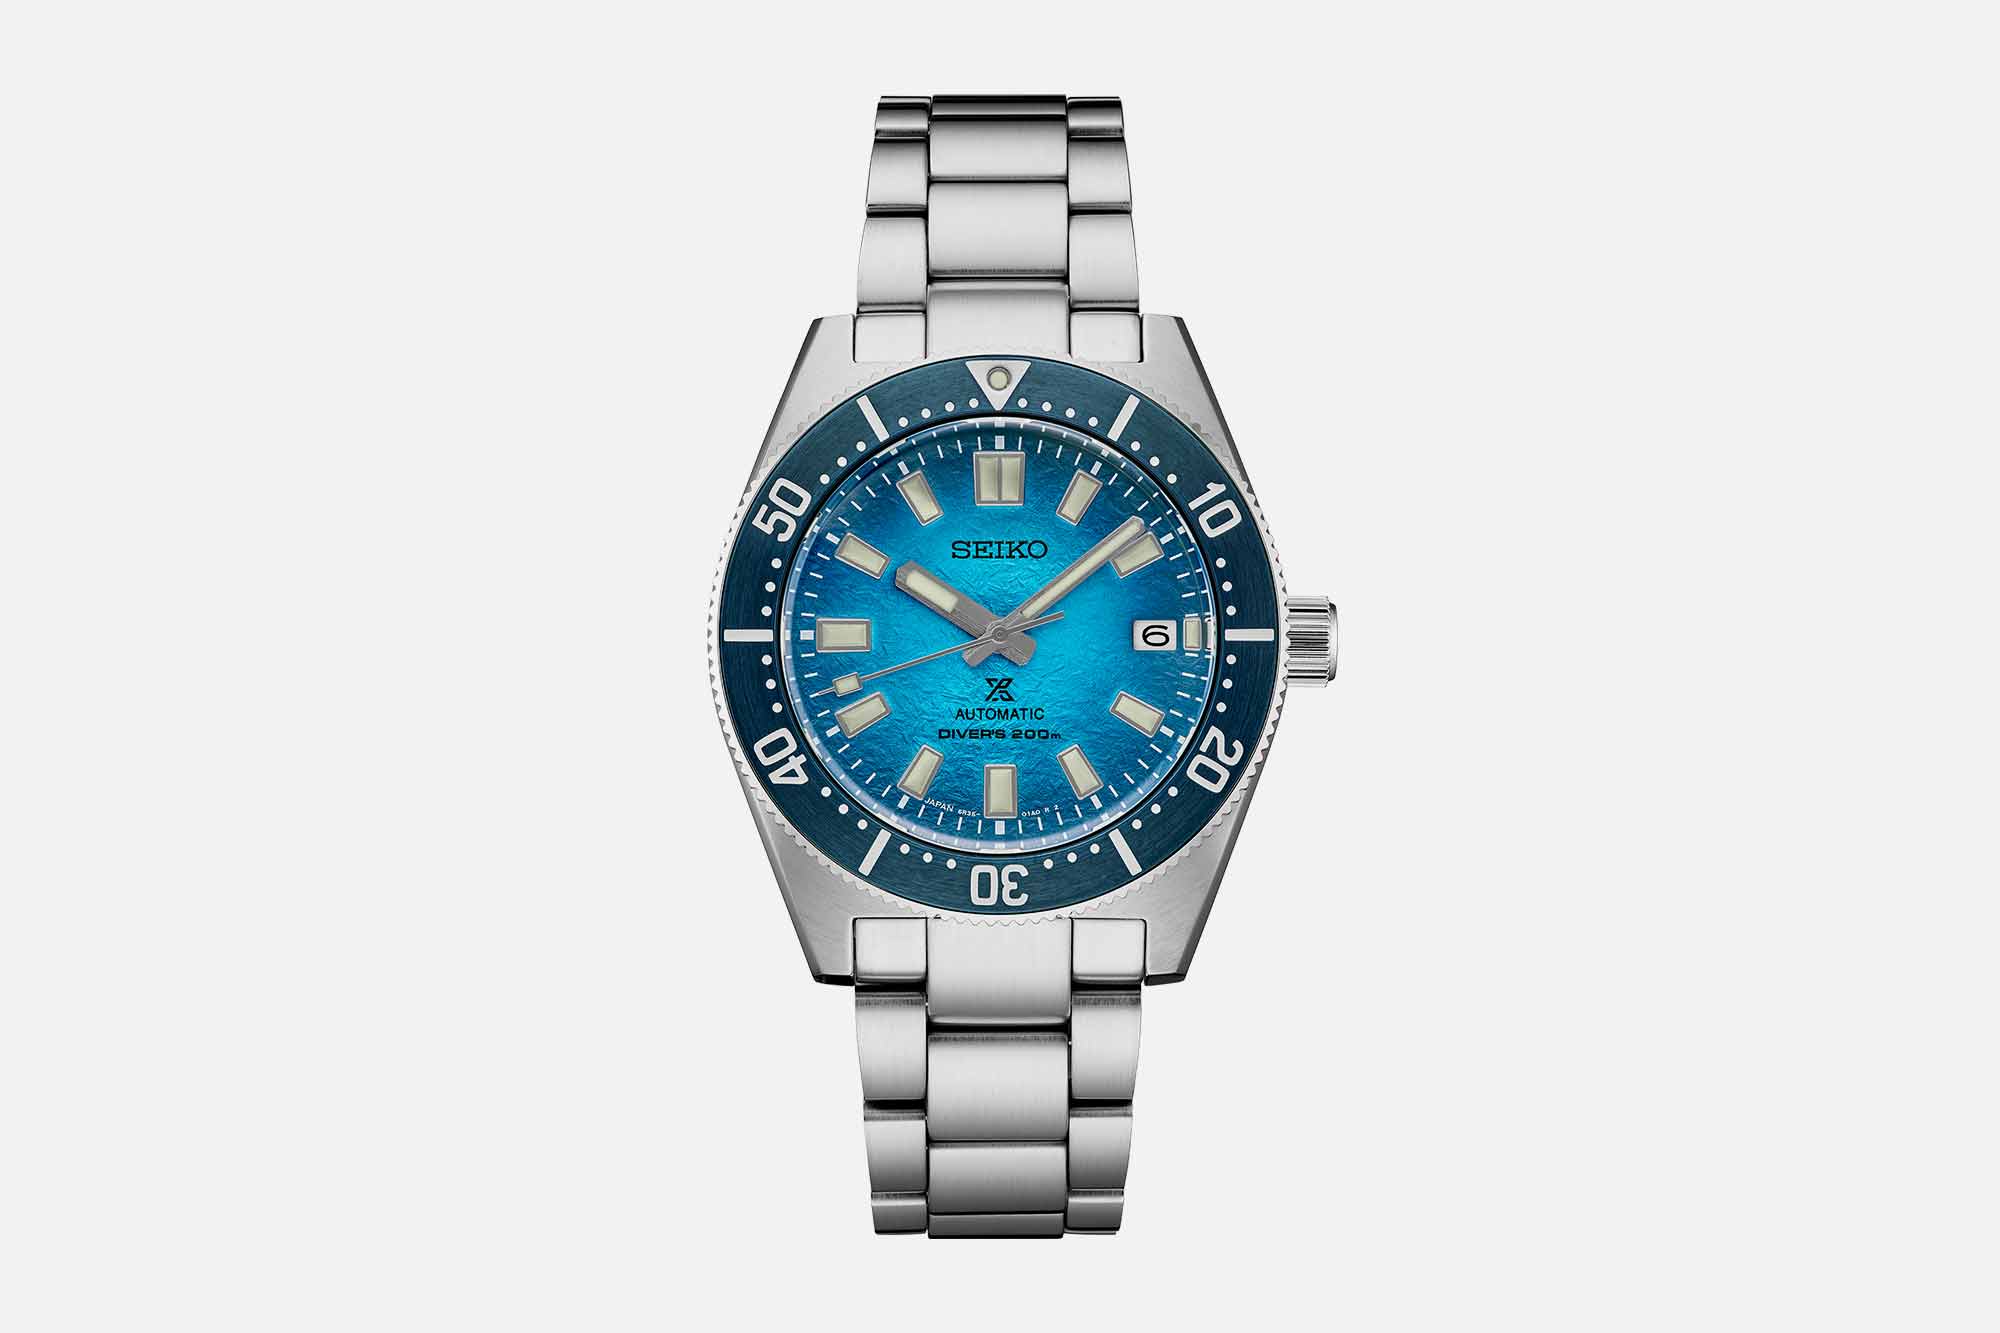 Seiko Launches Three US Exclusive Dive Watches Inspired by Cold Water American Diving Locales